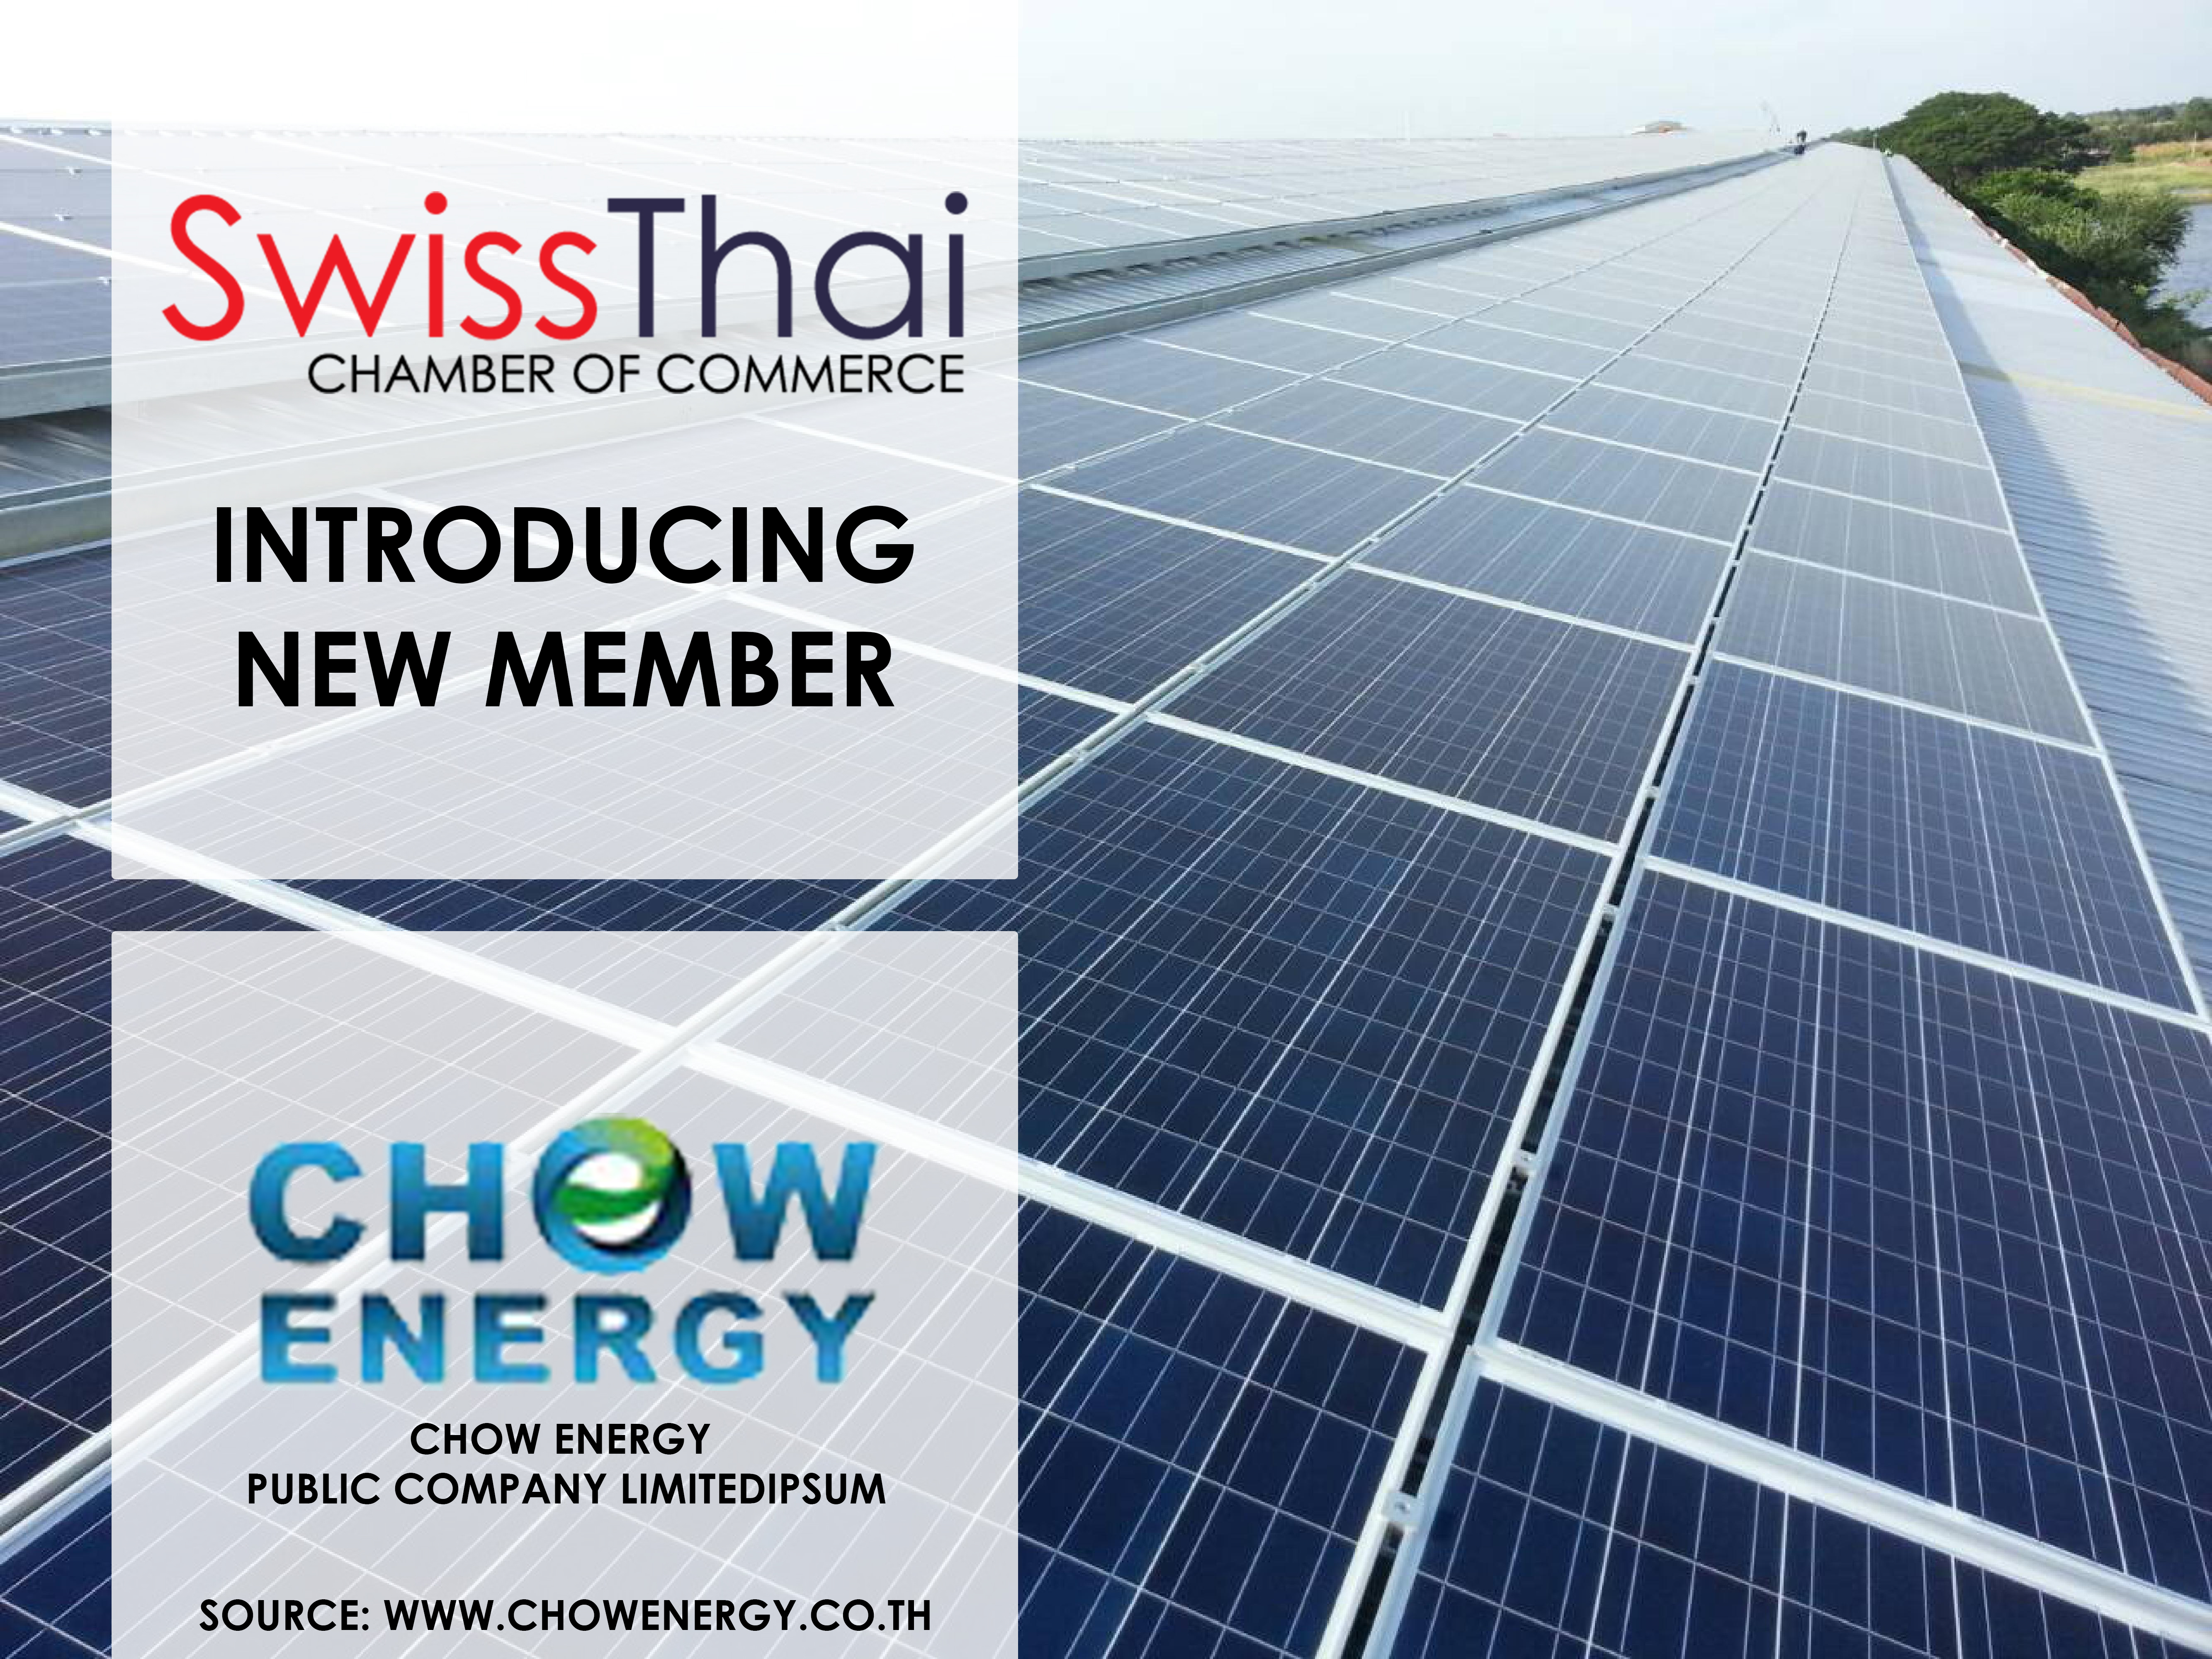 Chow Energy Public Company Limited